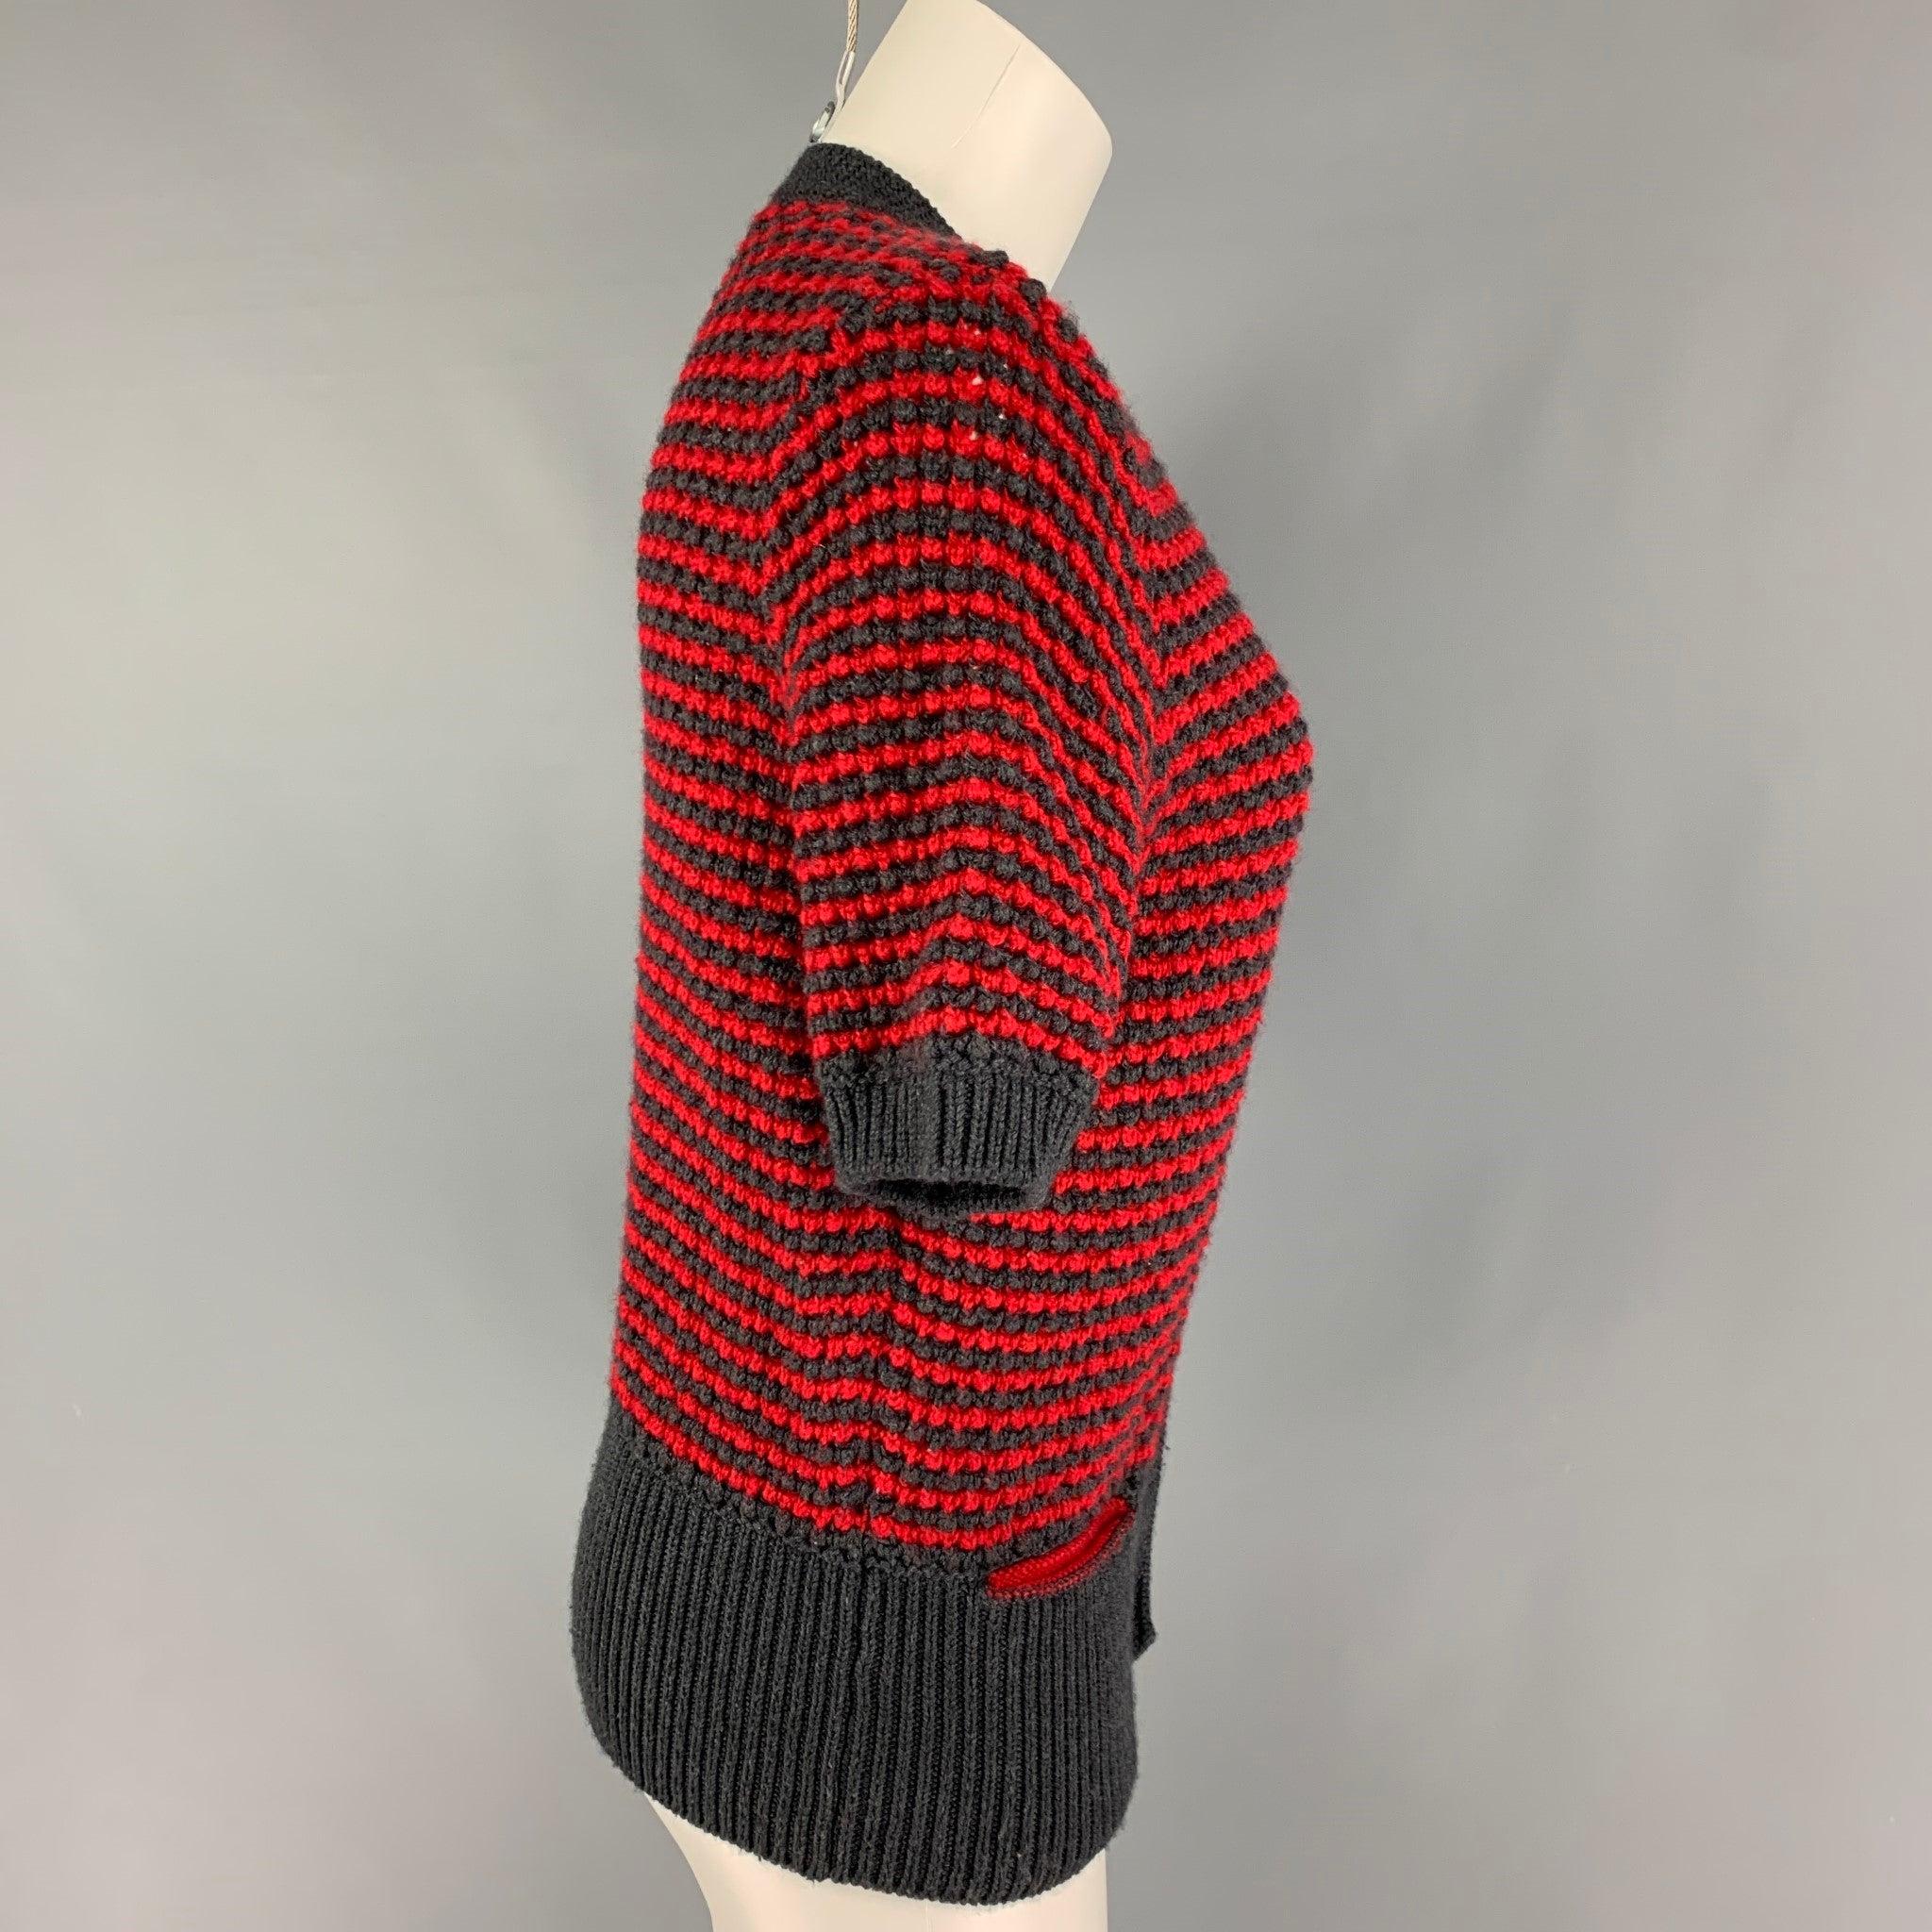 SEE by CHLOE cardigan comes in a grey & red knitted wool / acrylic featuring a buttoned closure. Made in Italy.
Very Good
Pre-Owned Condition. 

Marked:   8 

Measurements: 
 
Shoulder: 15.5 inches  Bust: 36 inches  Sleeve: 12 inches  Length: 23.5